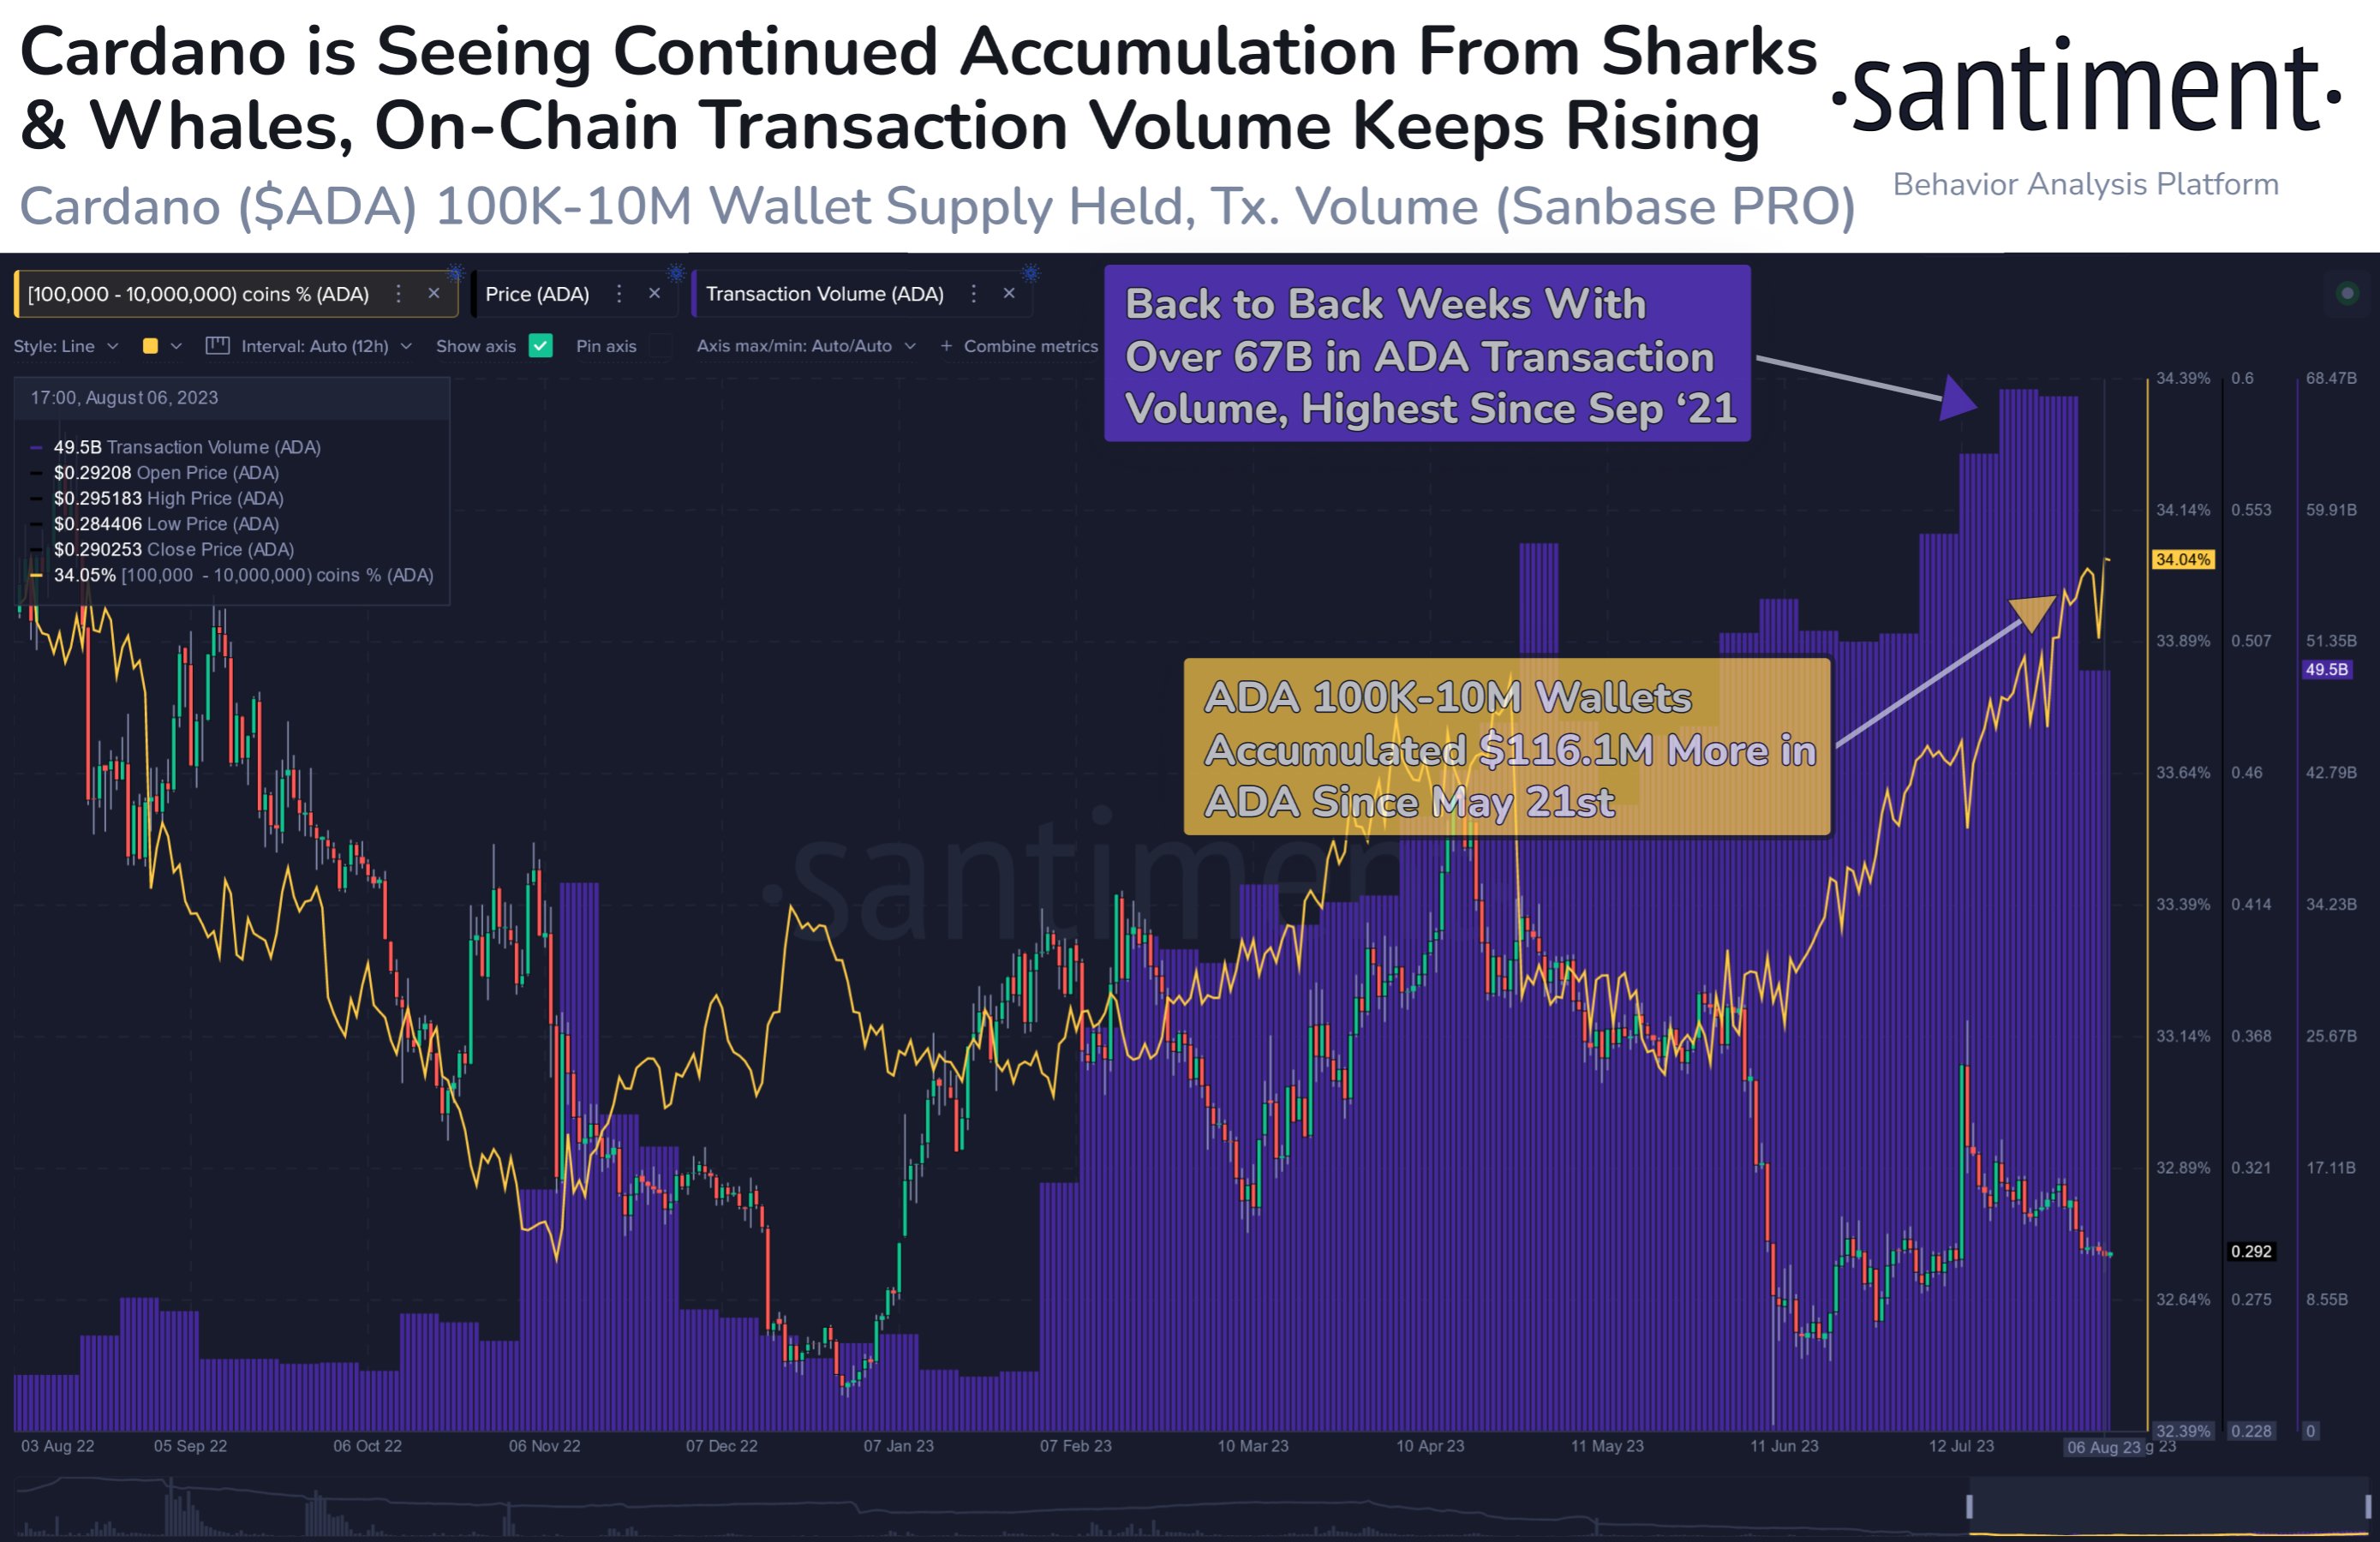  whales sharks cardano on-chain data continued buy 